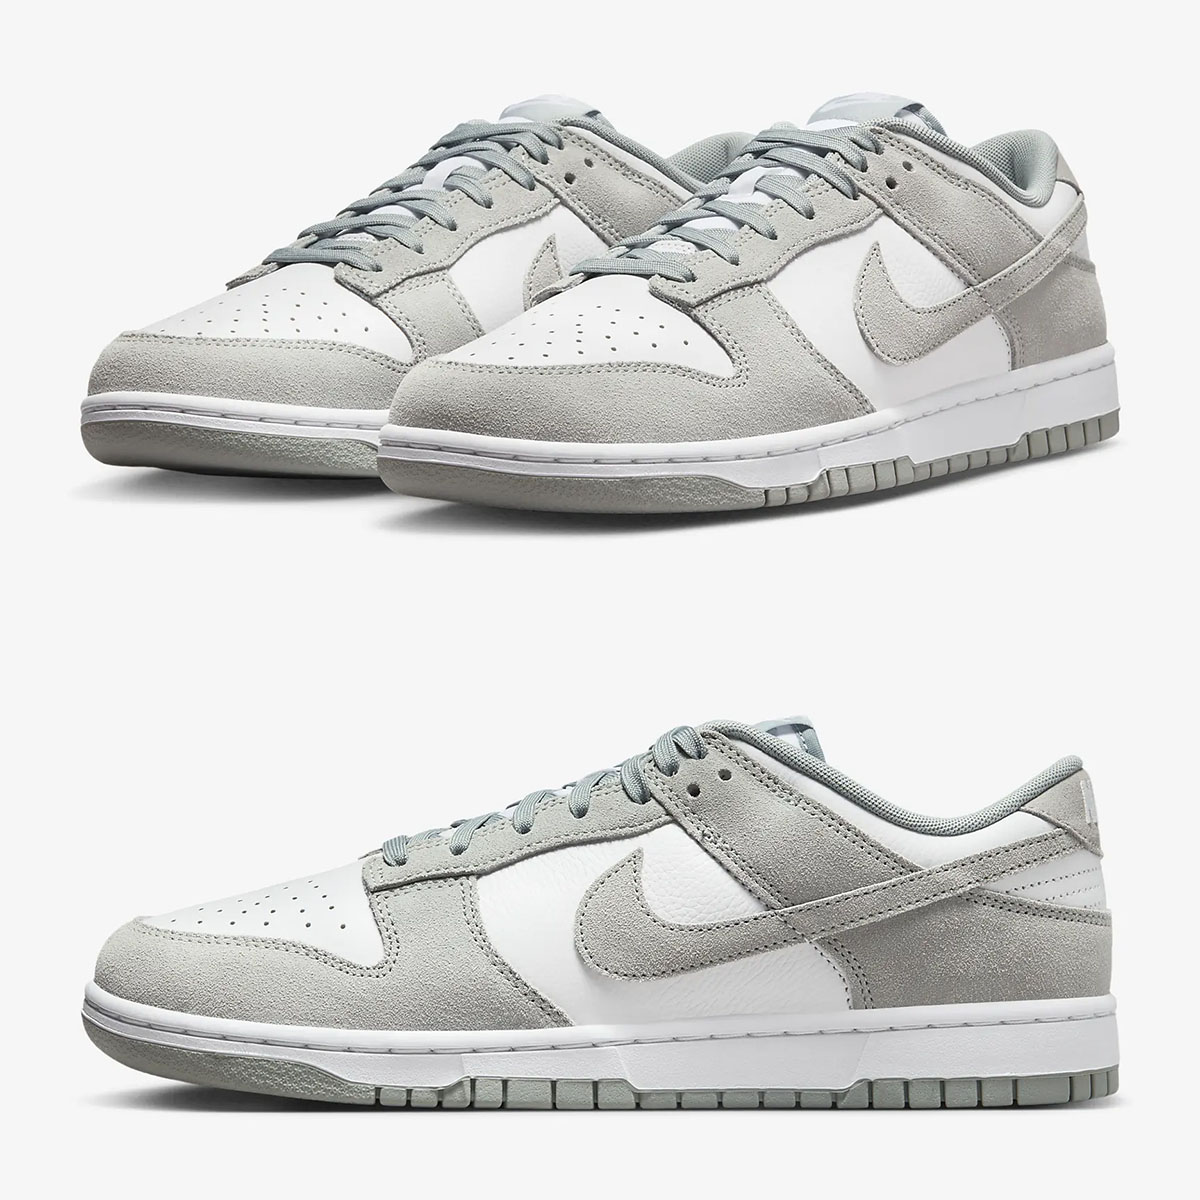 Nike Dunk Low Suede Grey White Light Pumice